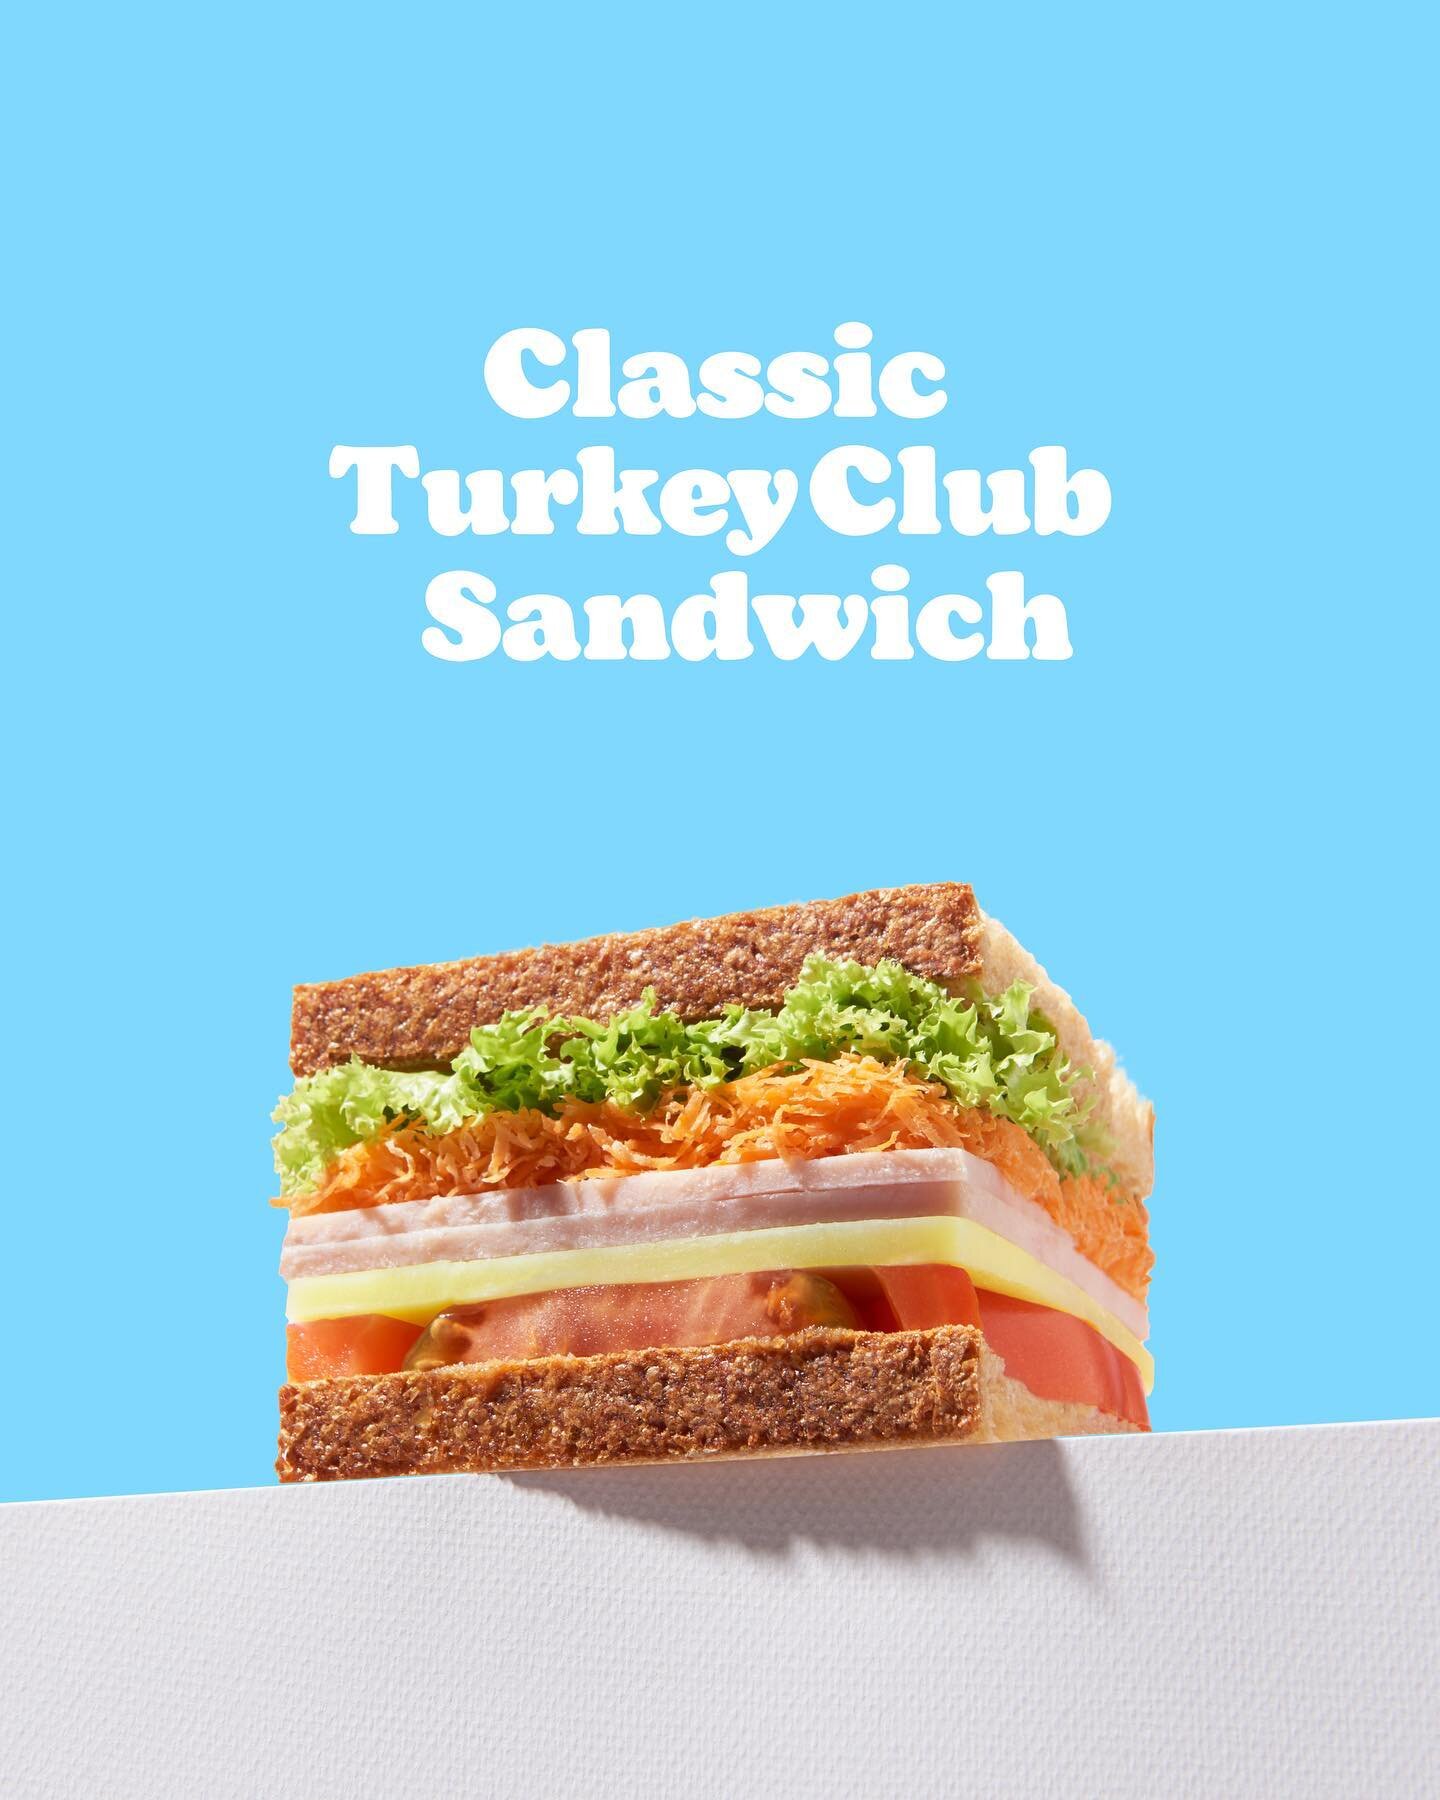 Our e-commerce photography studio is all about showcasing the best of the best, and this sandwich shot is no exception! 

#photography #ecommerce #foodphotography #yummy #sandwiches #ecommercephotography #turkeysandwich